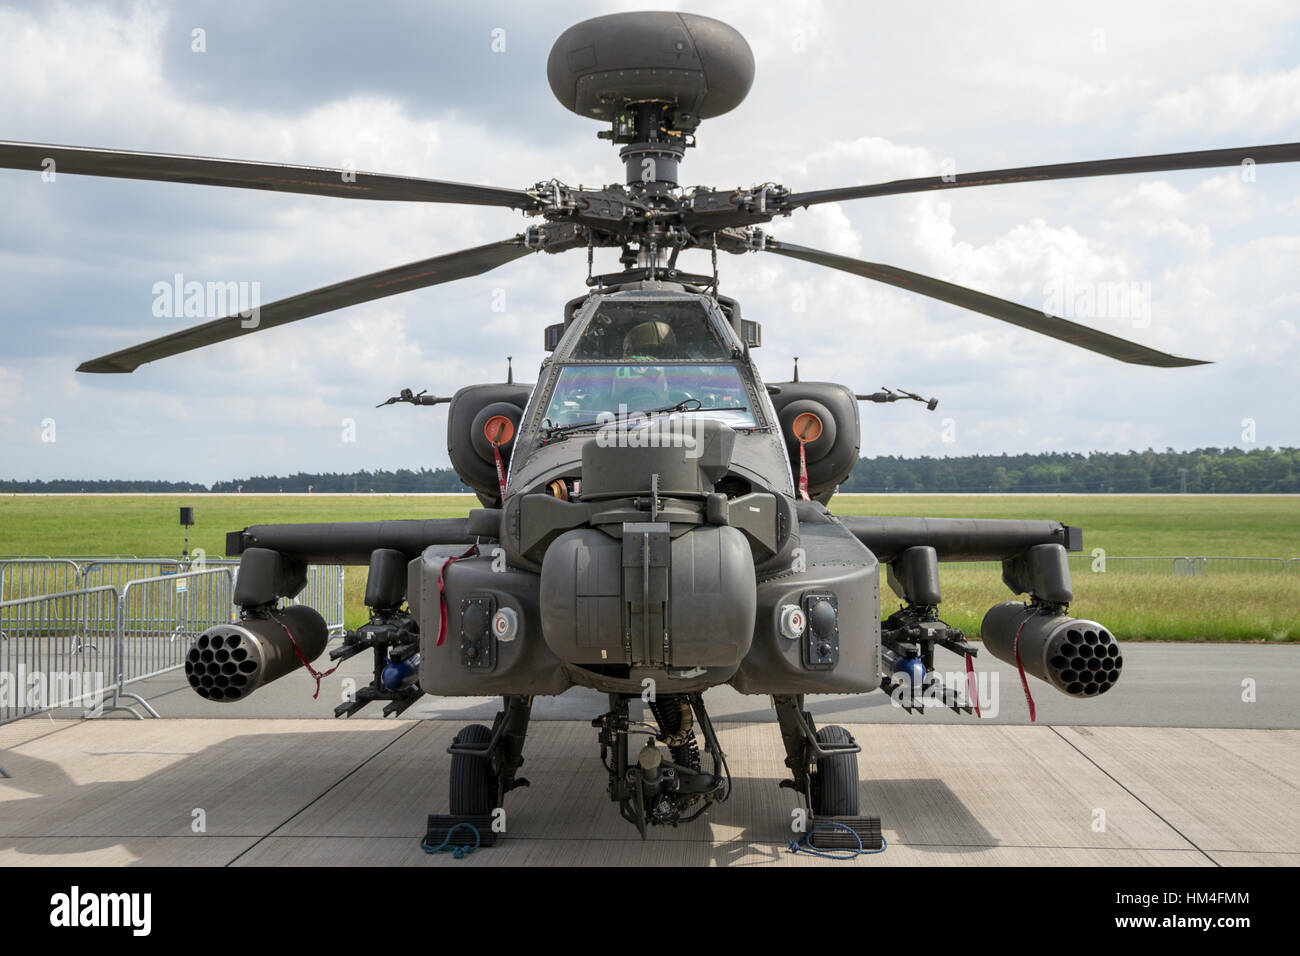 BERLIN - JUN 2, 2016: British Army's Army Air Corps AH-64D Apache attack helicopter on display at the Berlin Airshow ILA on Berlin-Schoneveld airport Stock Photo